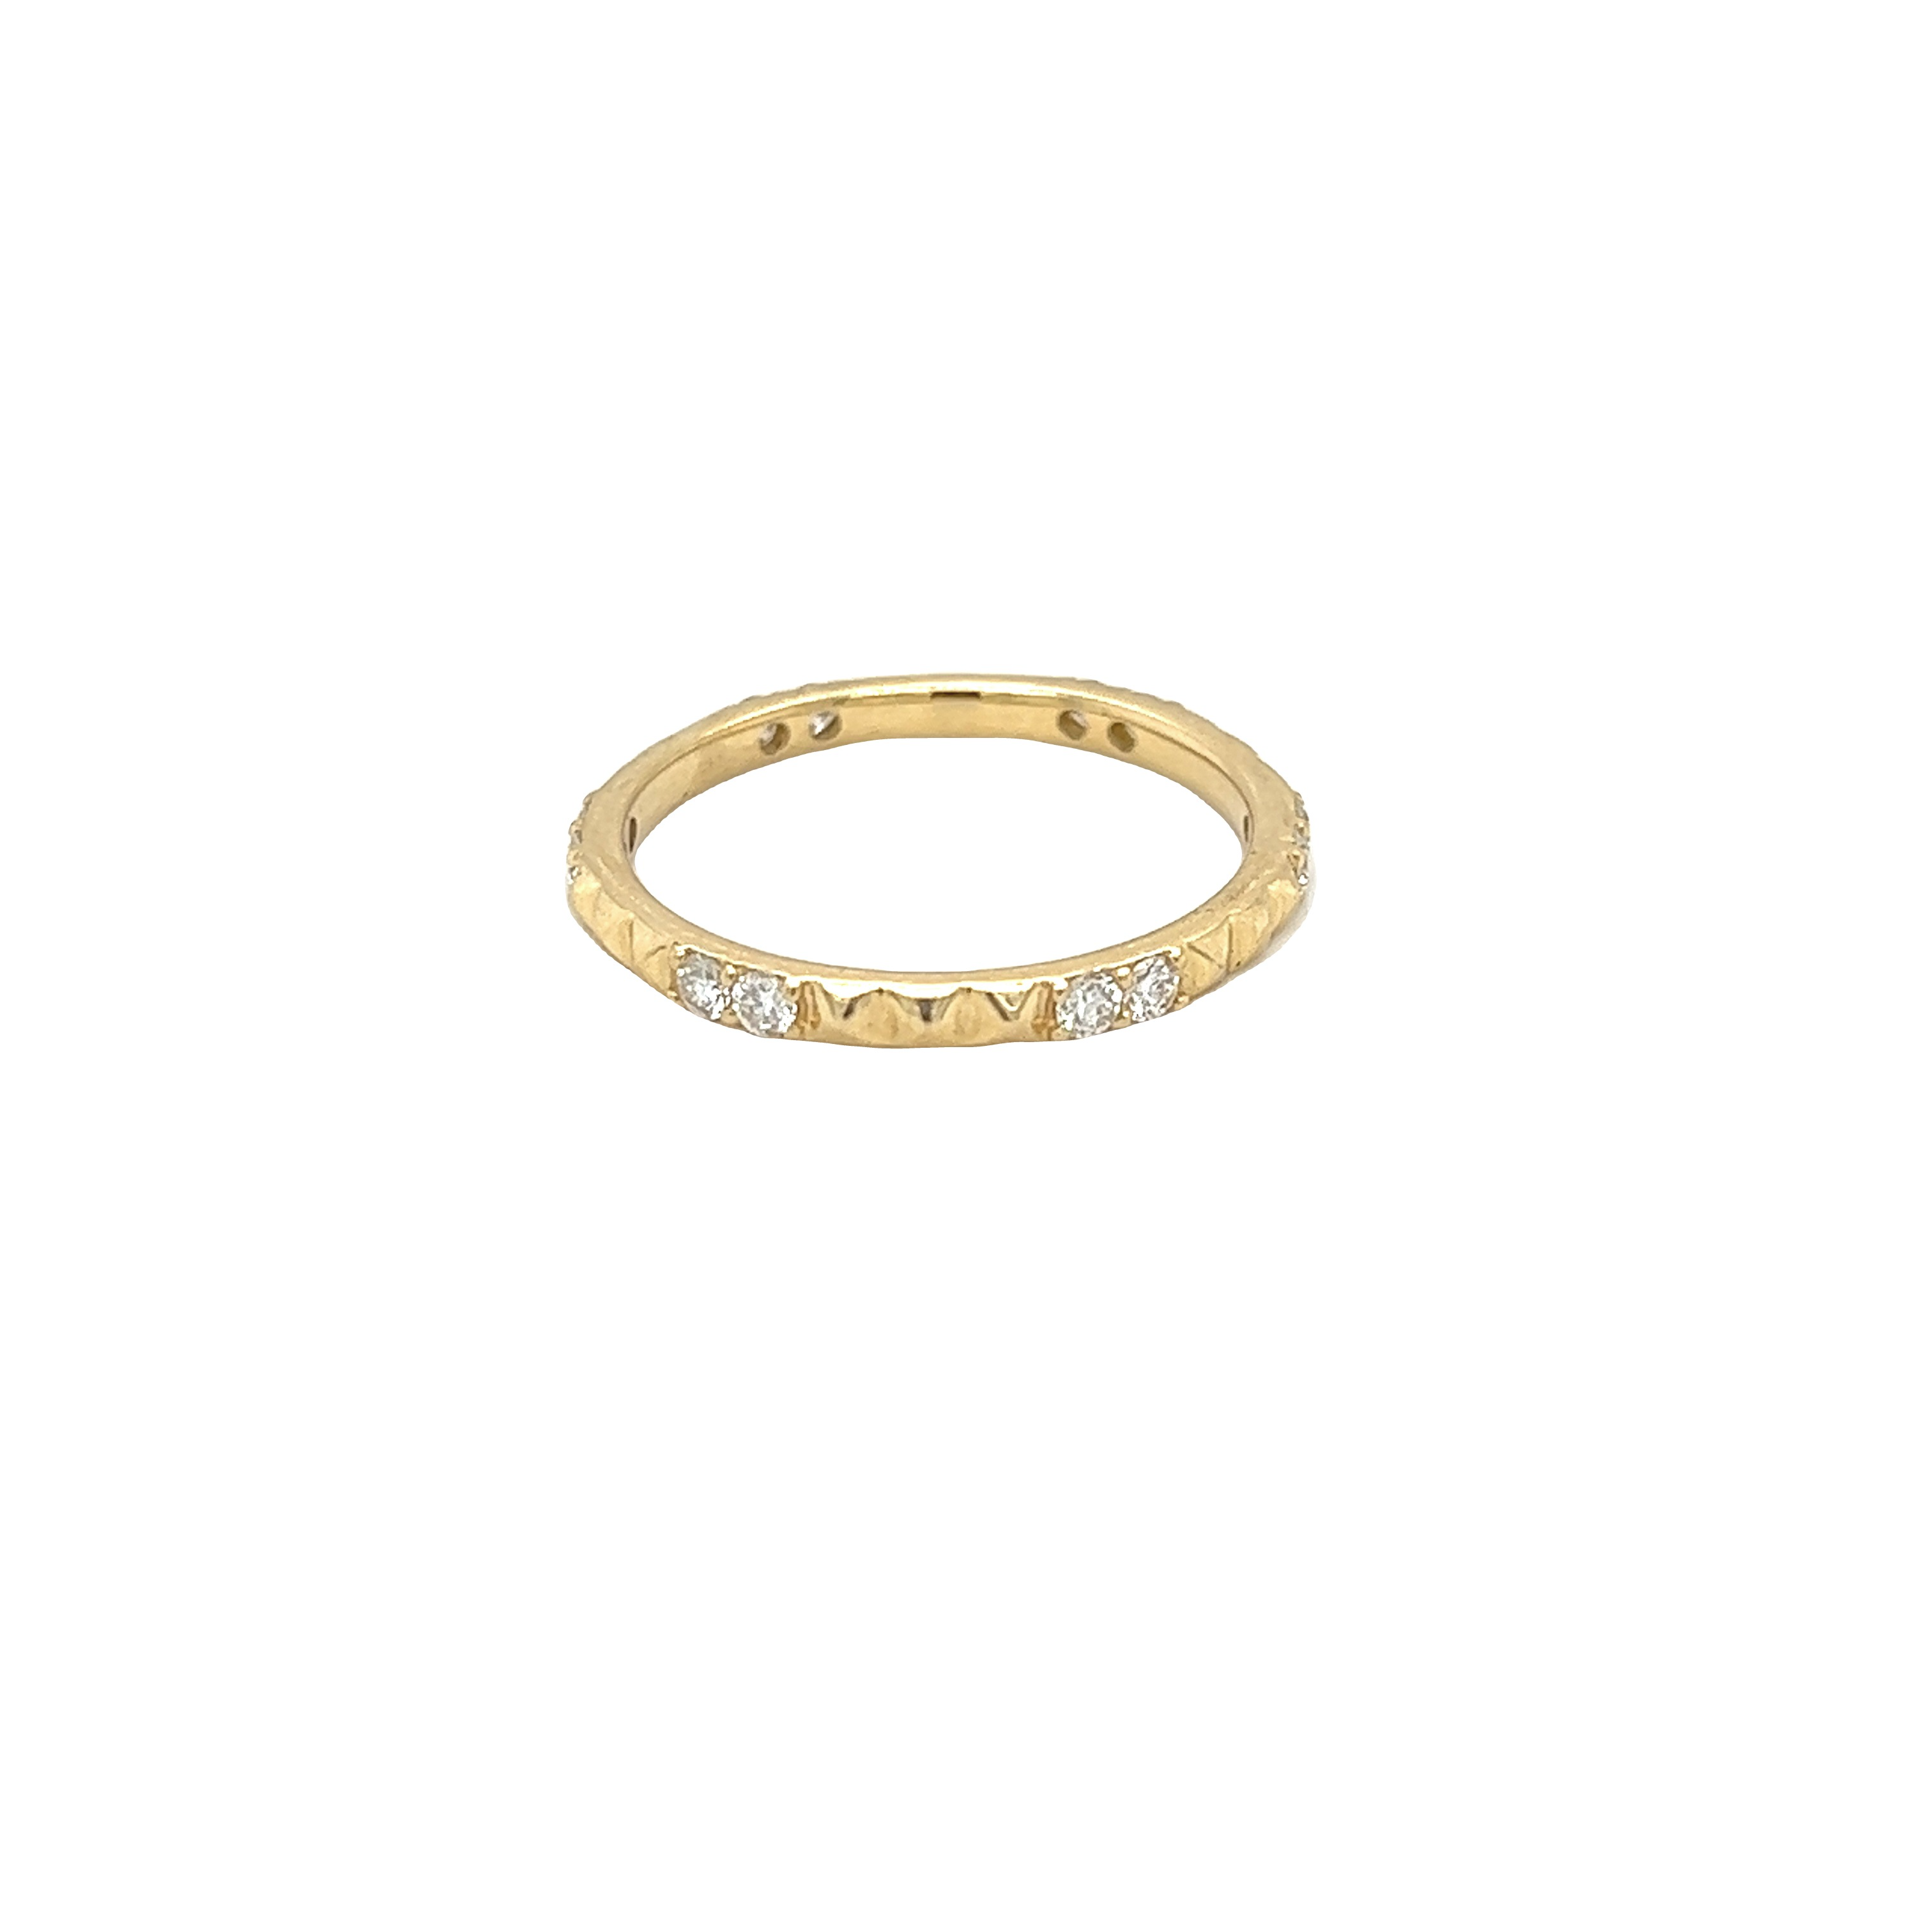 Featured image for “Pyramid and Diamond Stackable Ring”